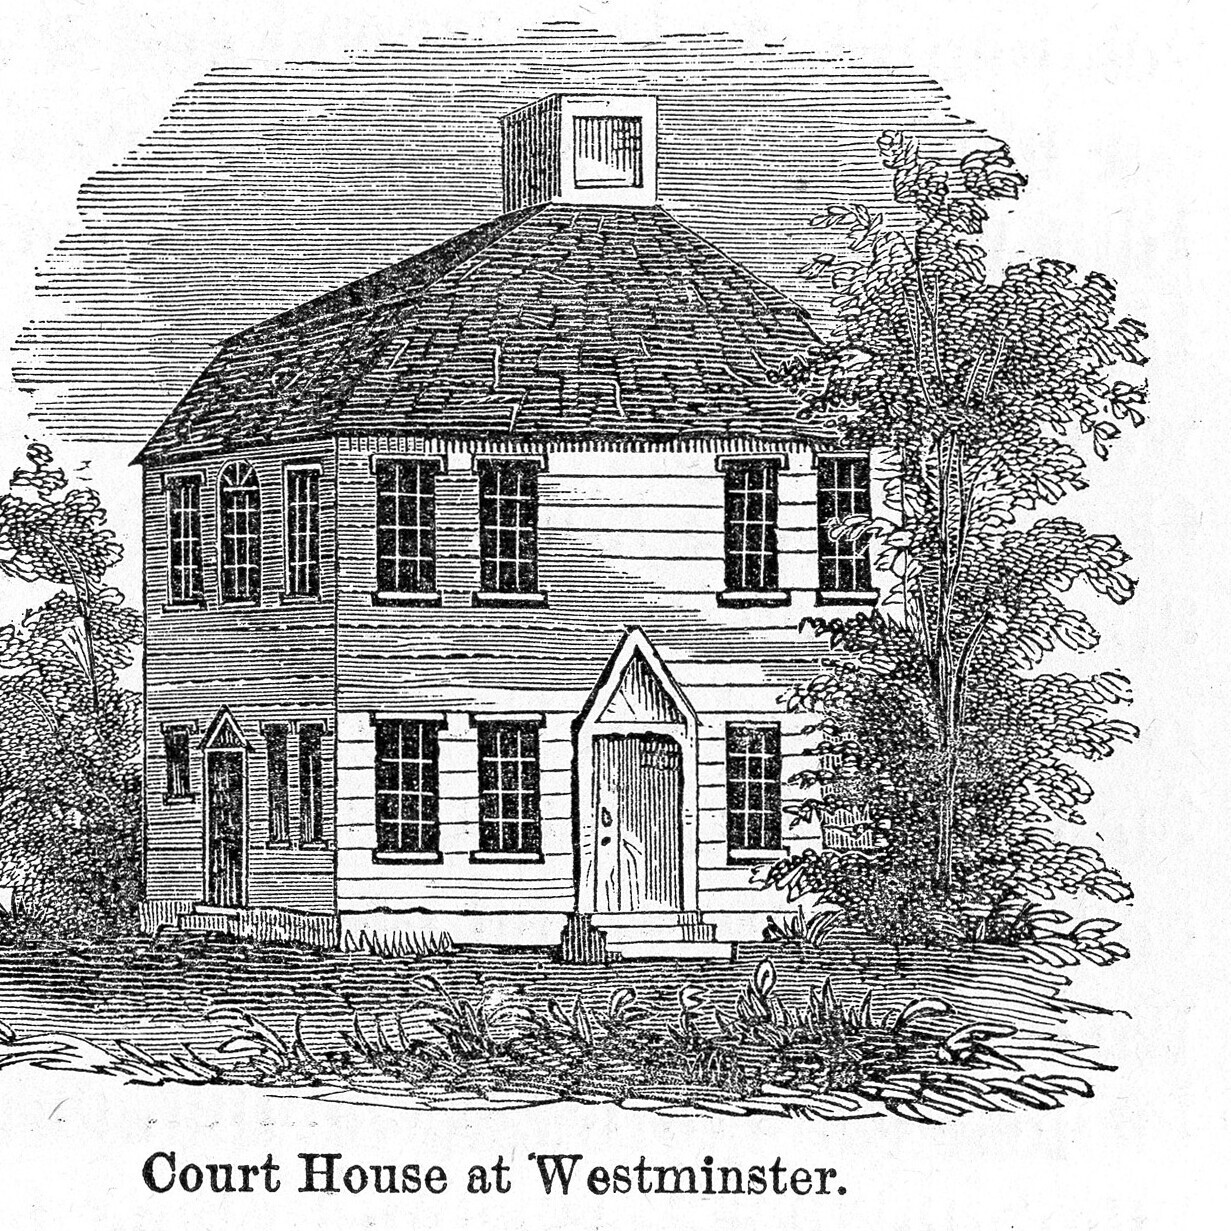 Illustration of Court House at Westminster